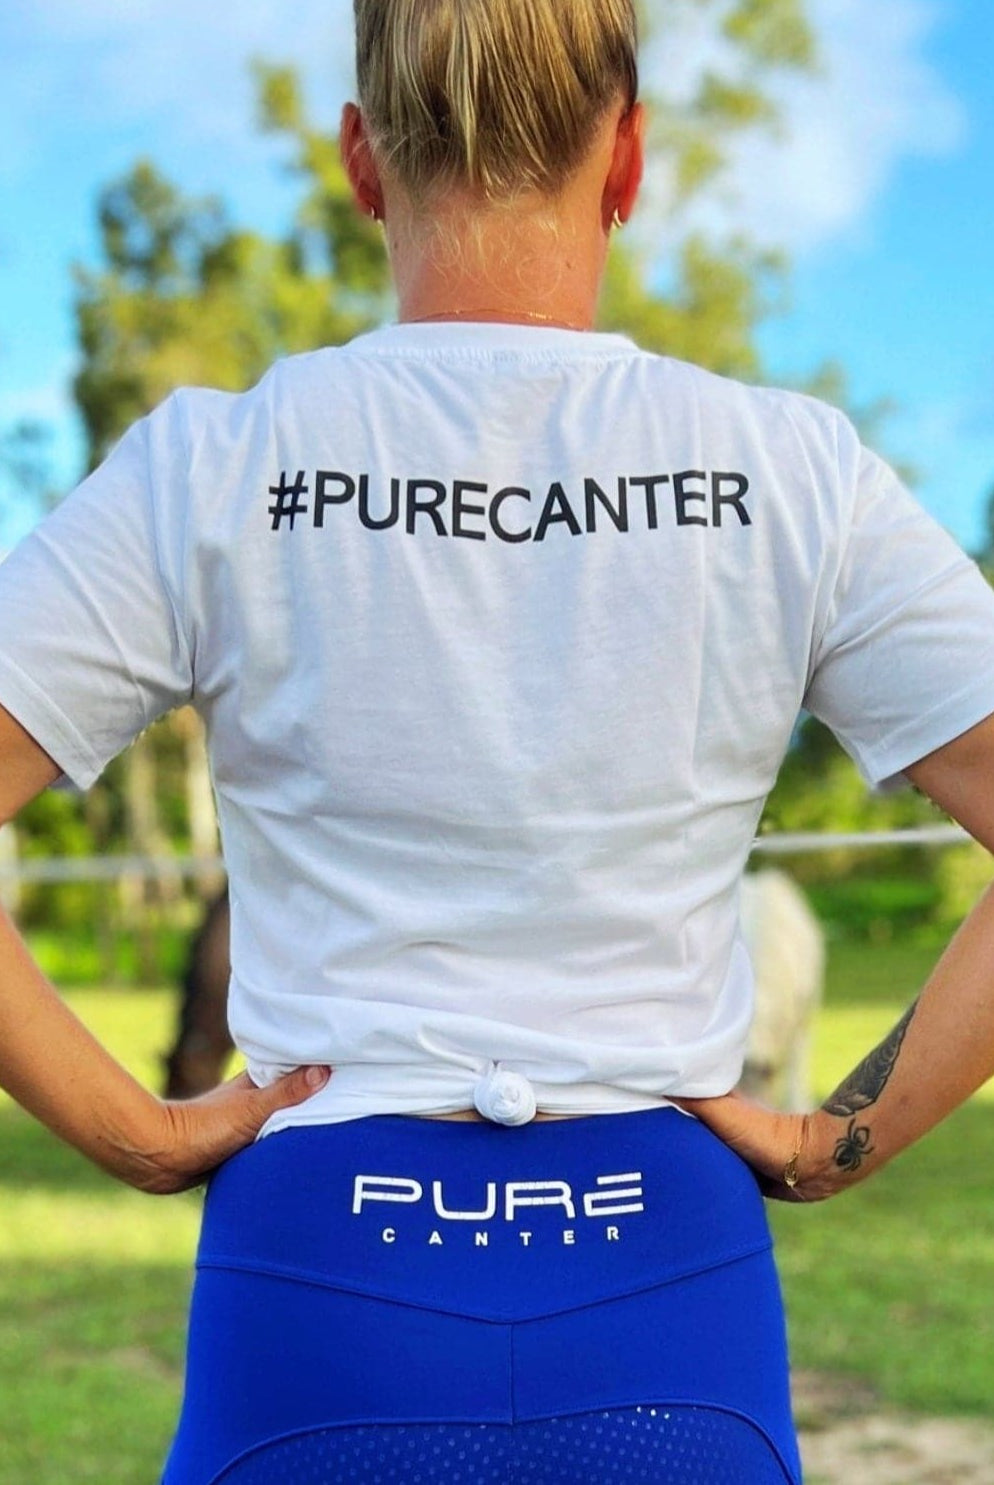 back view of Pure Canter Emblem shirt showing of the hashtag